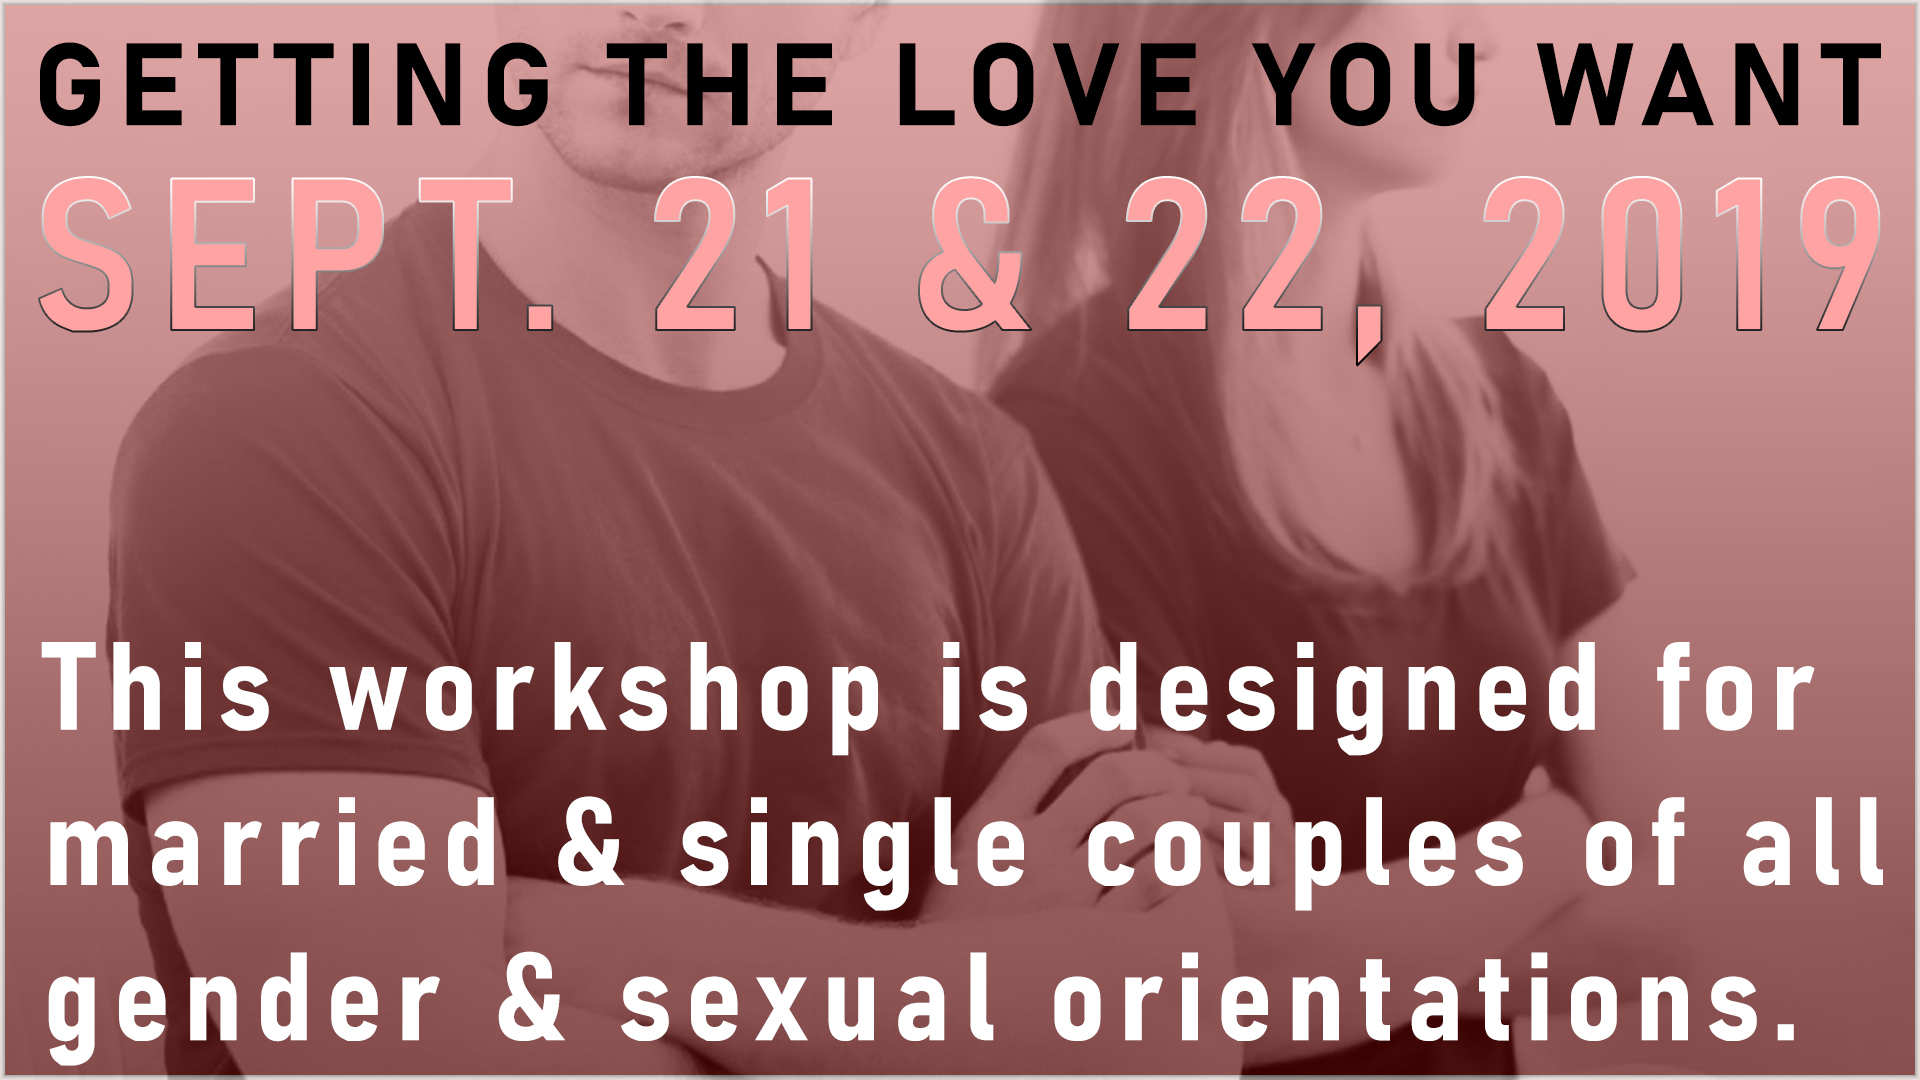 Getting The Love You Want workshops are for all sexual orientations